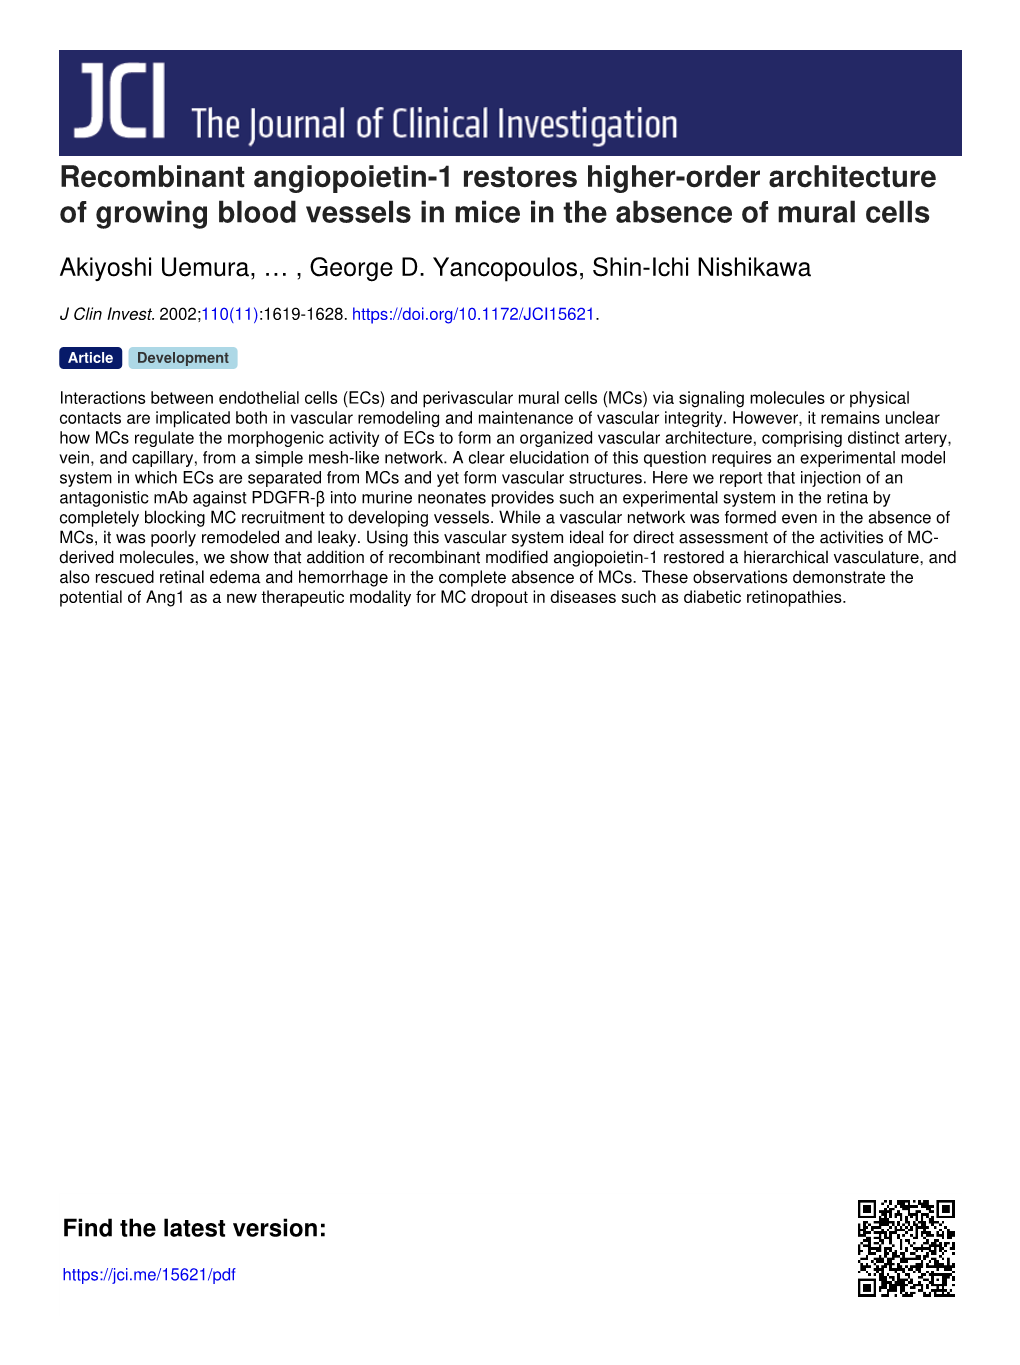 Recombinant Angiopoietin-1 Restores Higher-Order Architecture of Growing Blood Vessels in Mice in the Absence of Mural Cells